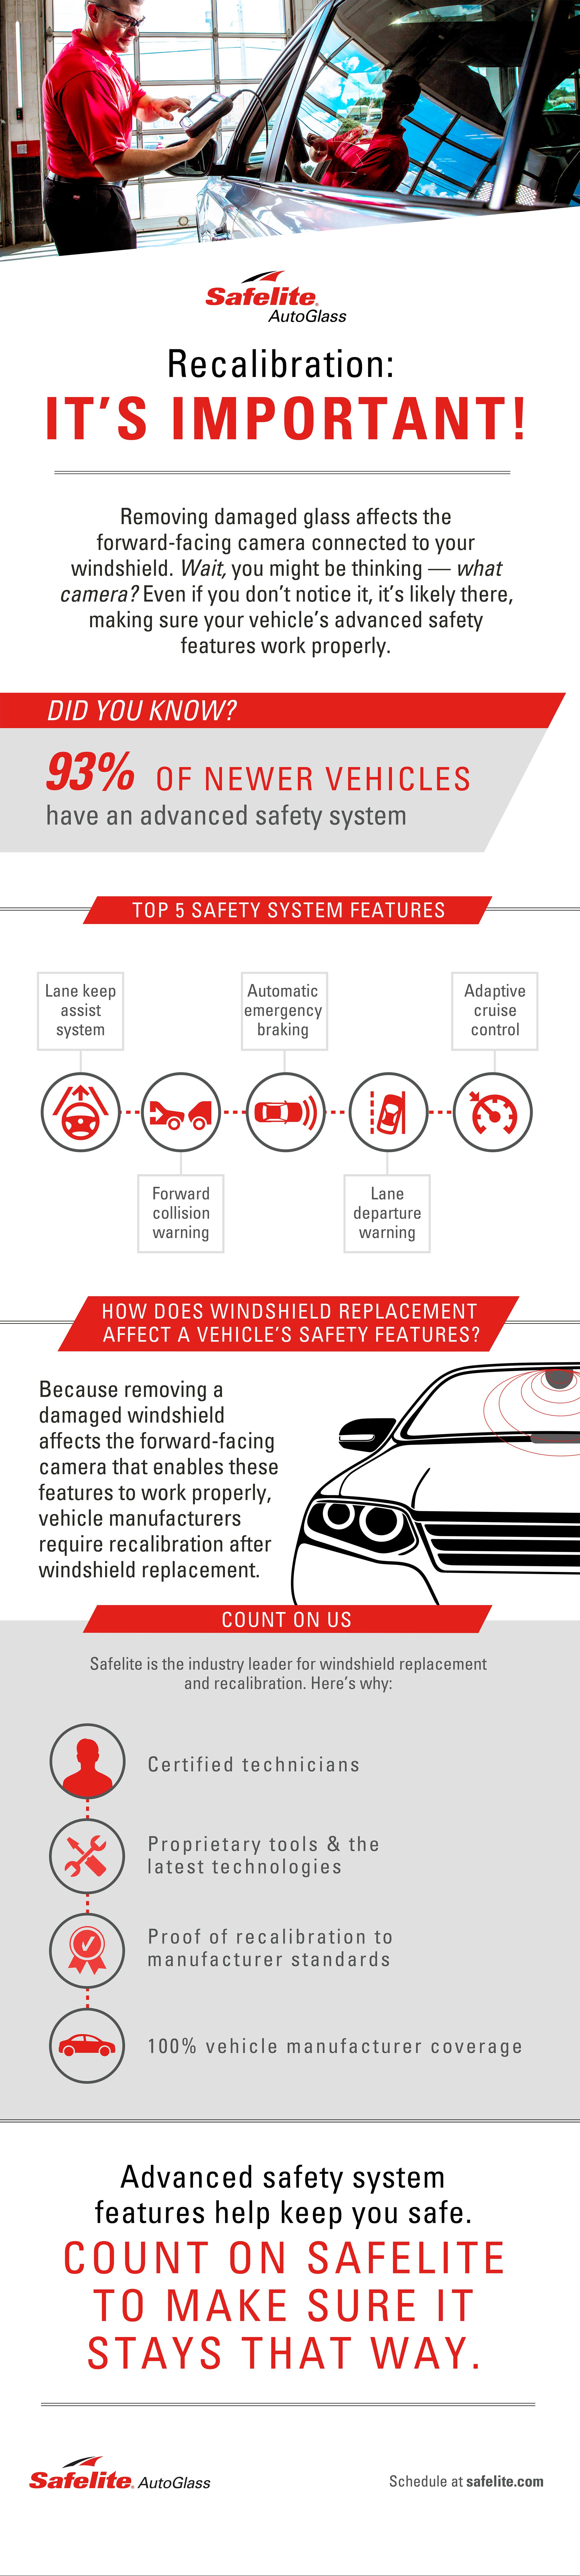 Why recalibrating your vehicle's advanced safety system is important